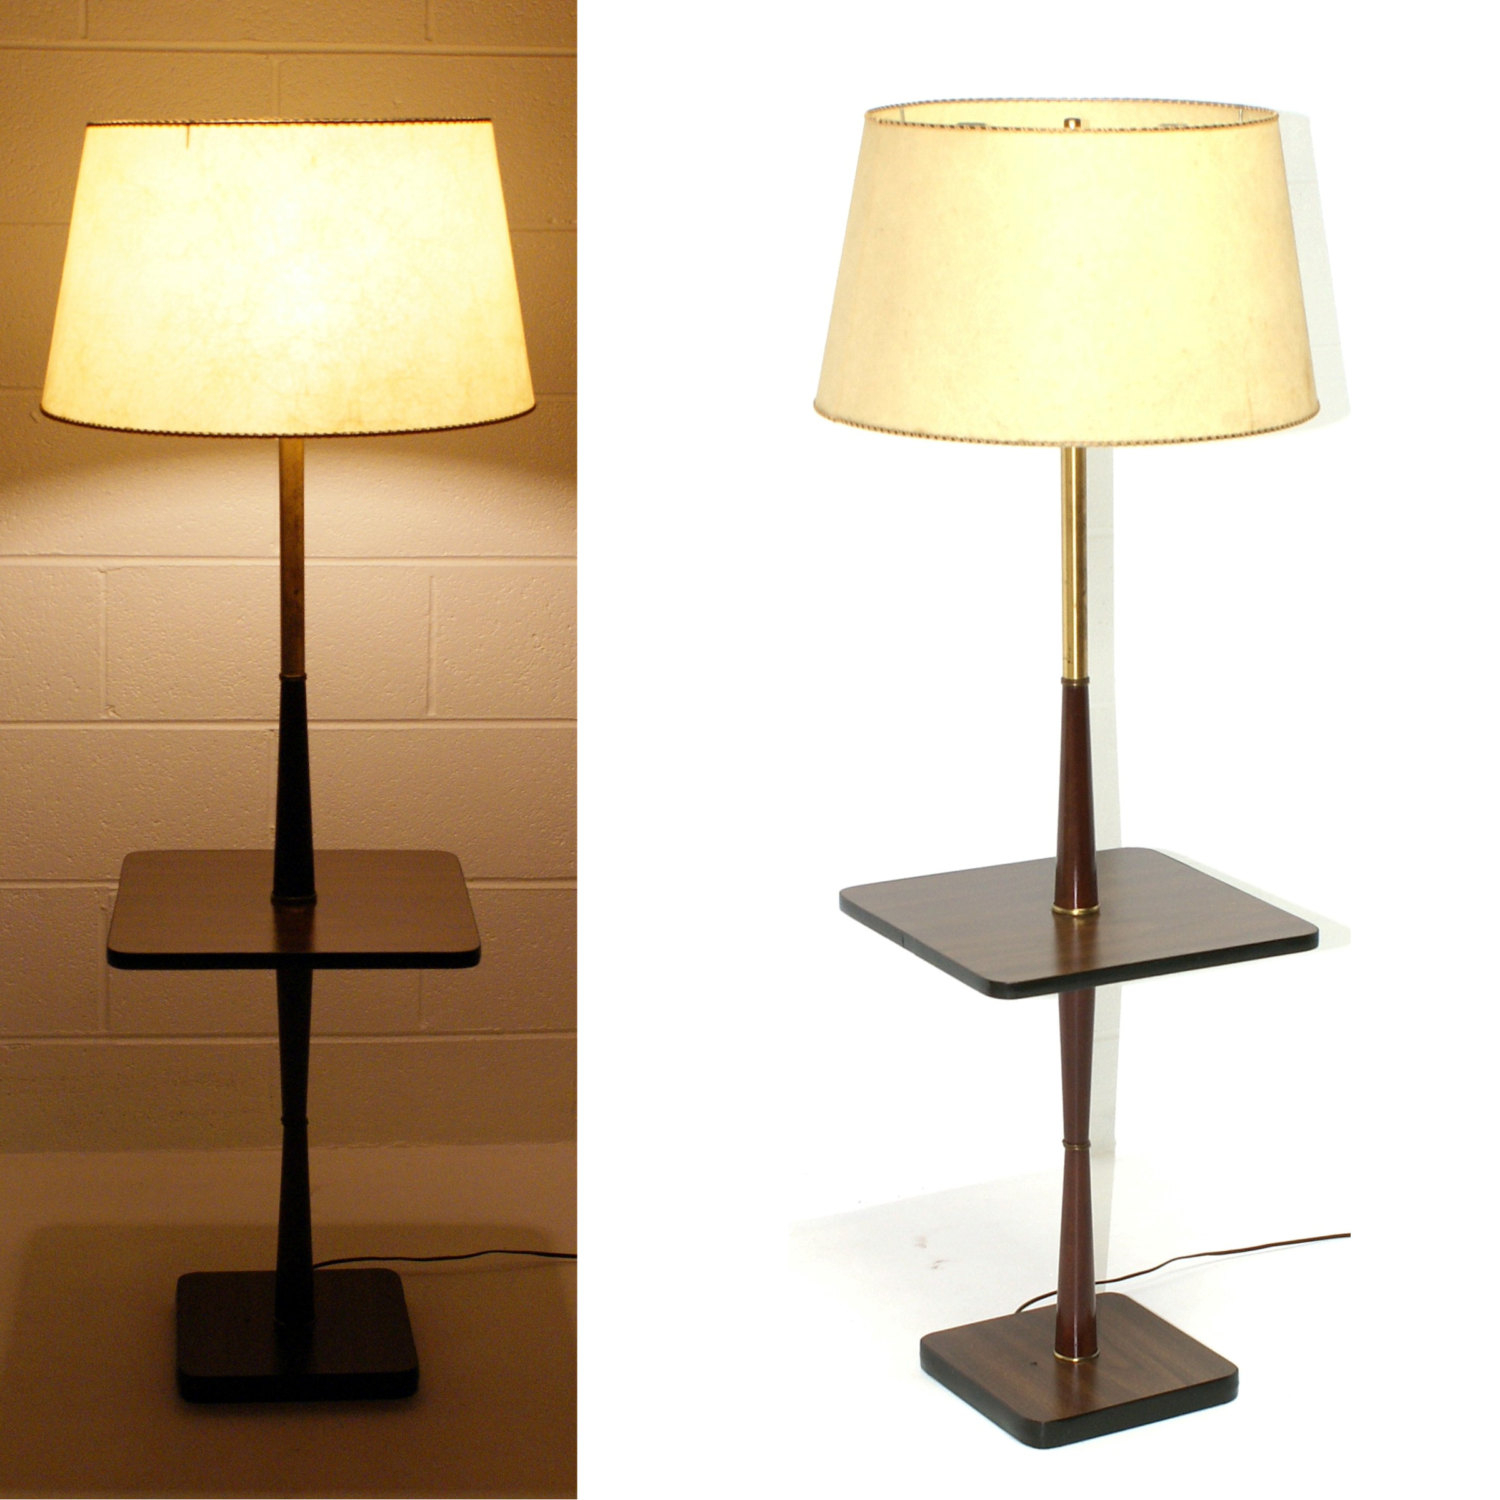 Flooring Floor Lamp With Table Attached Walmart End Built inside size 1500 X 1500